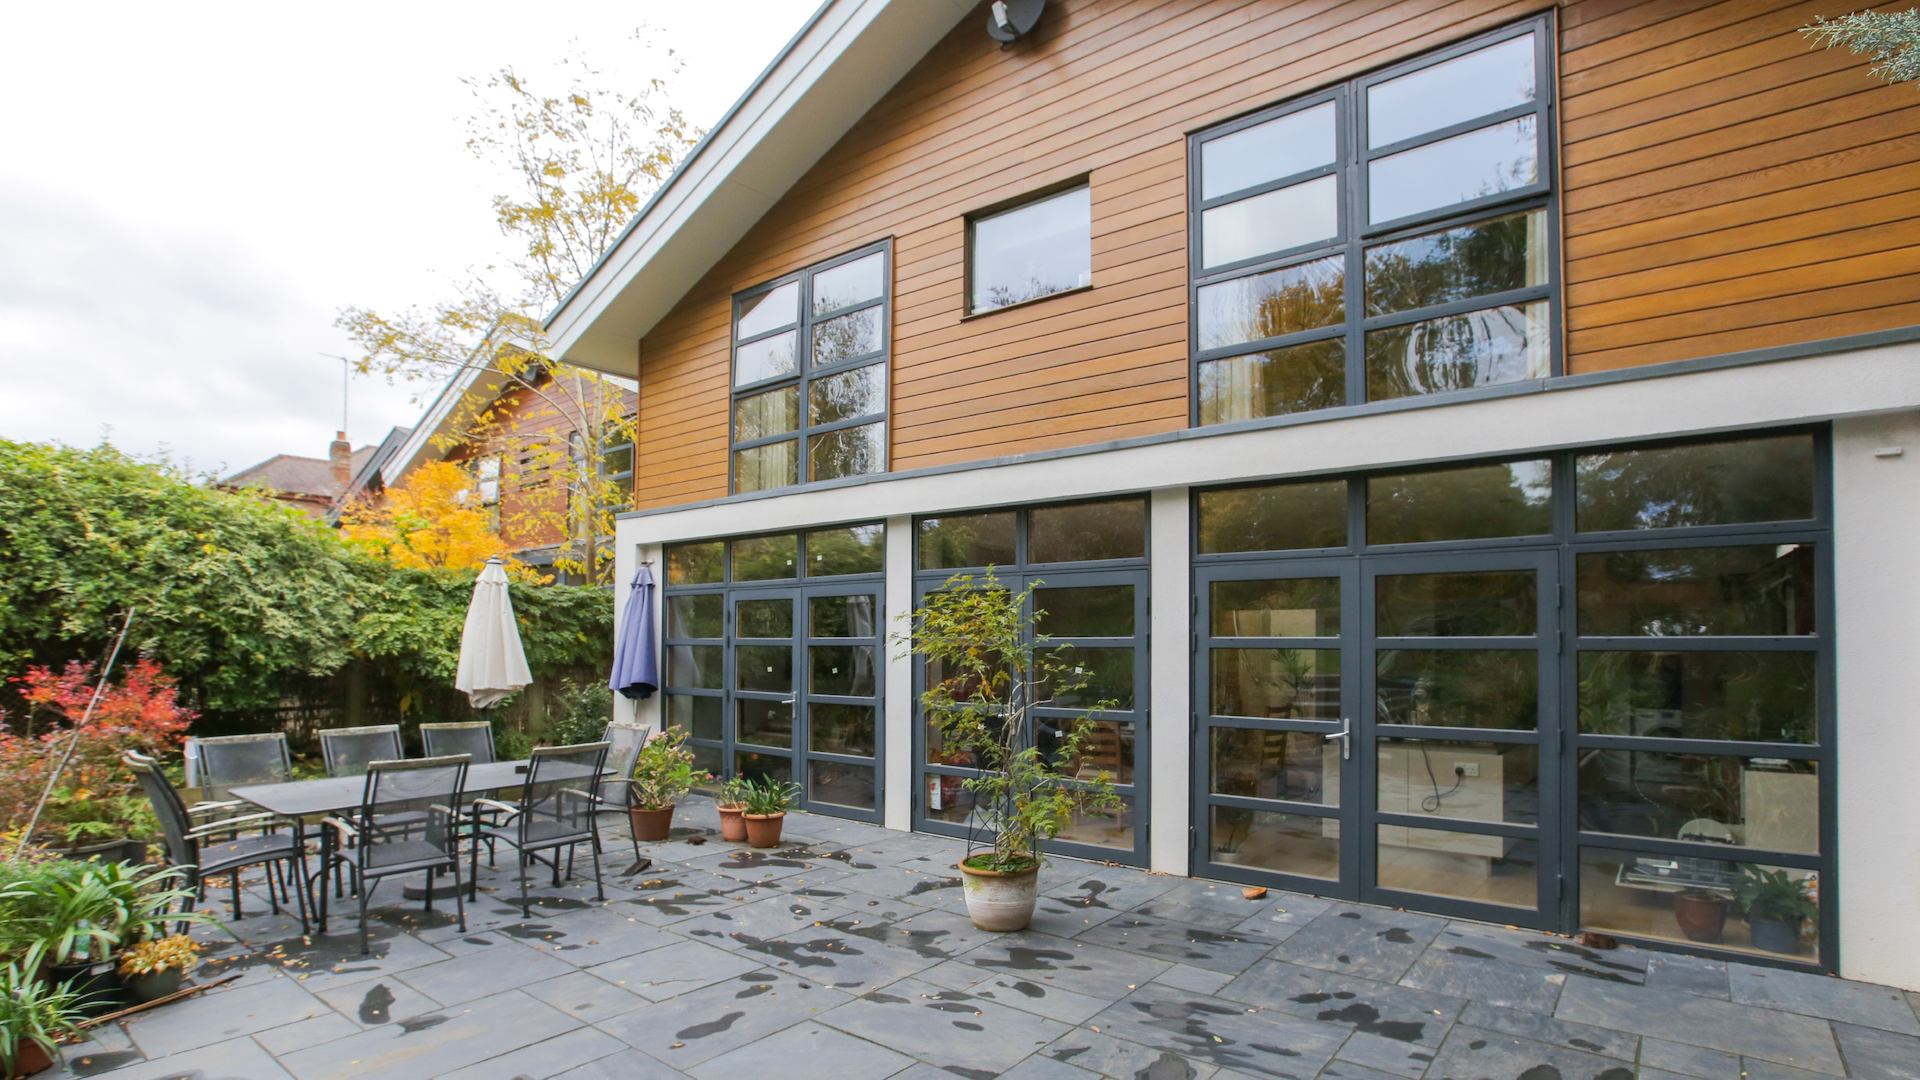 exterior view of an accessible, sustainable home and garden